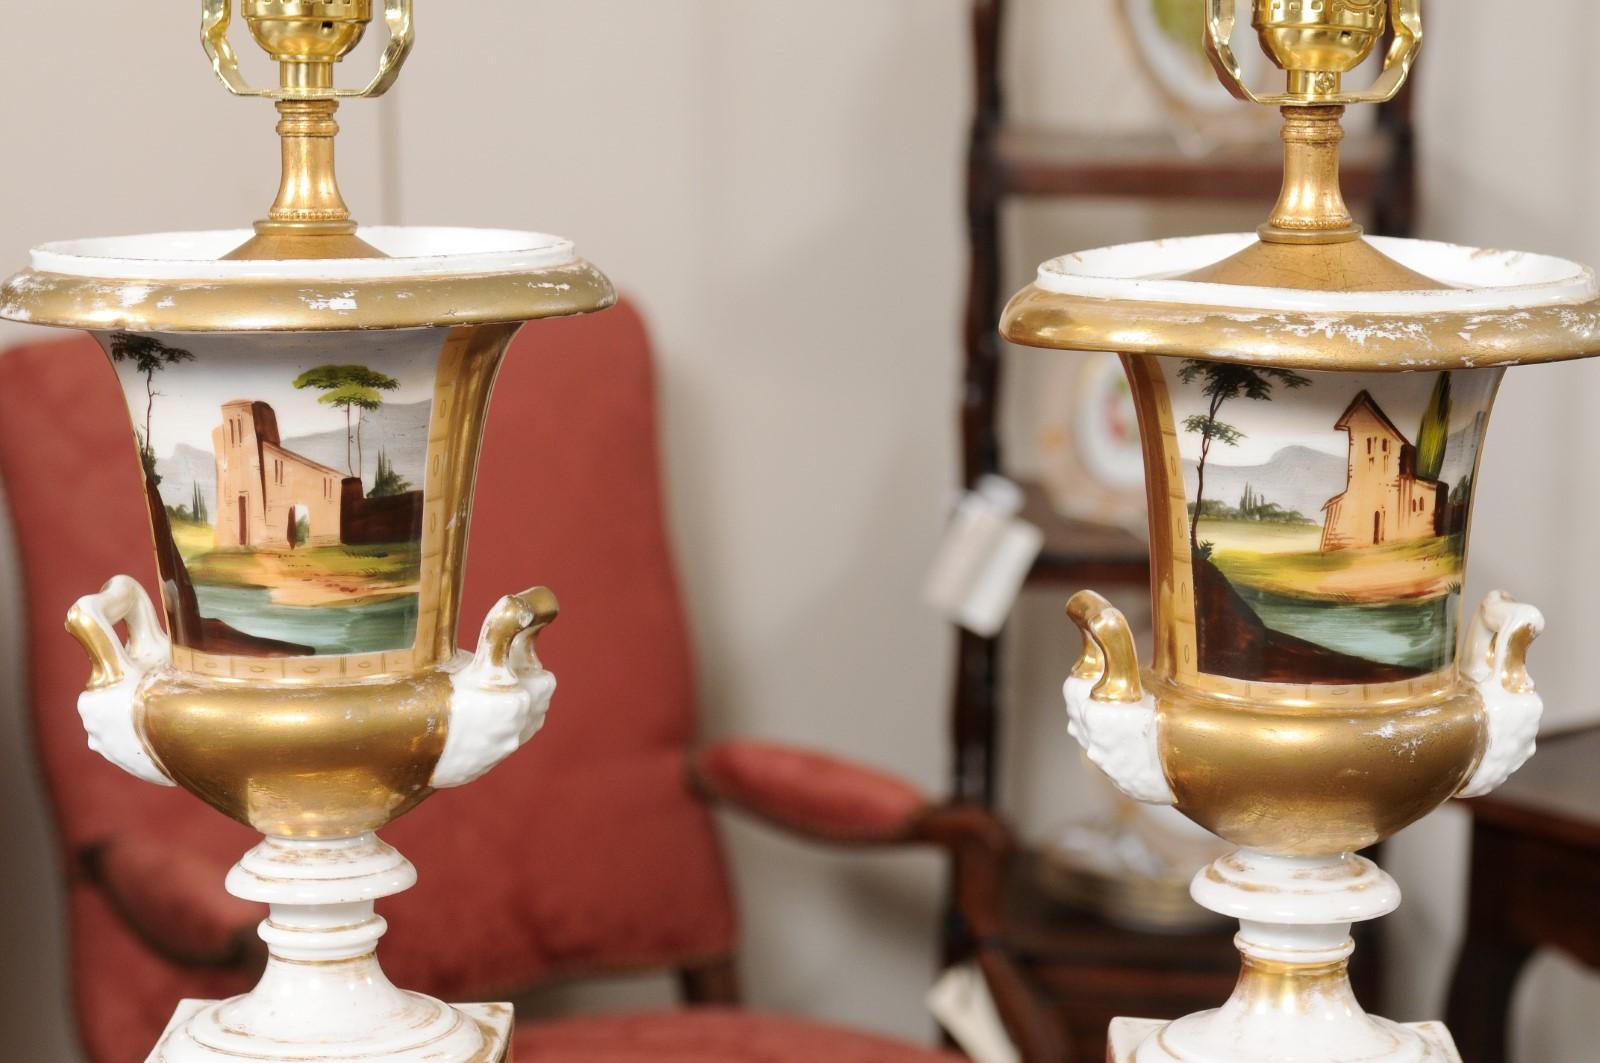  Pair of 19th Century Paris Porcelain Urns, wired as Lamps For Sale 9